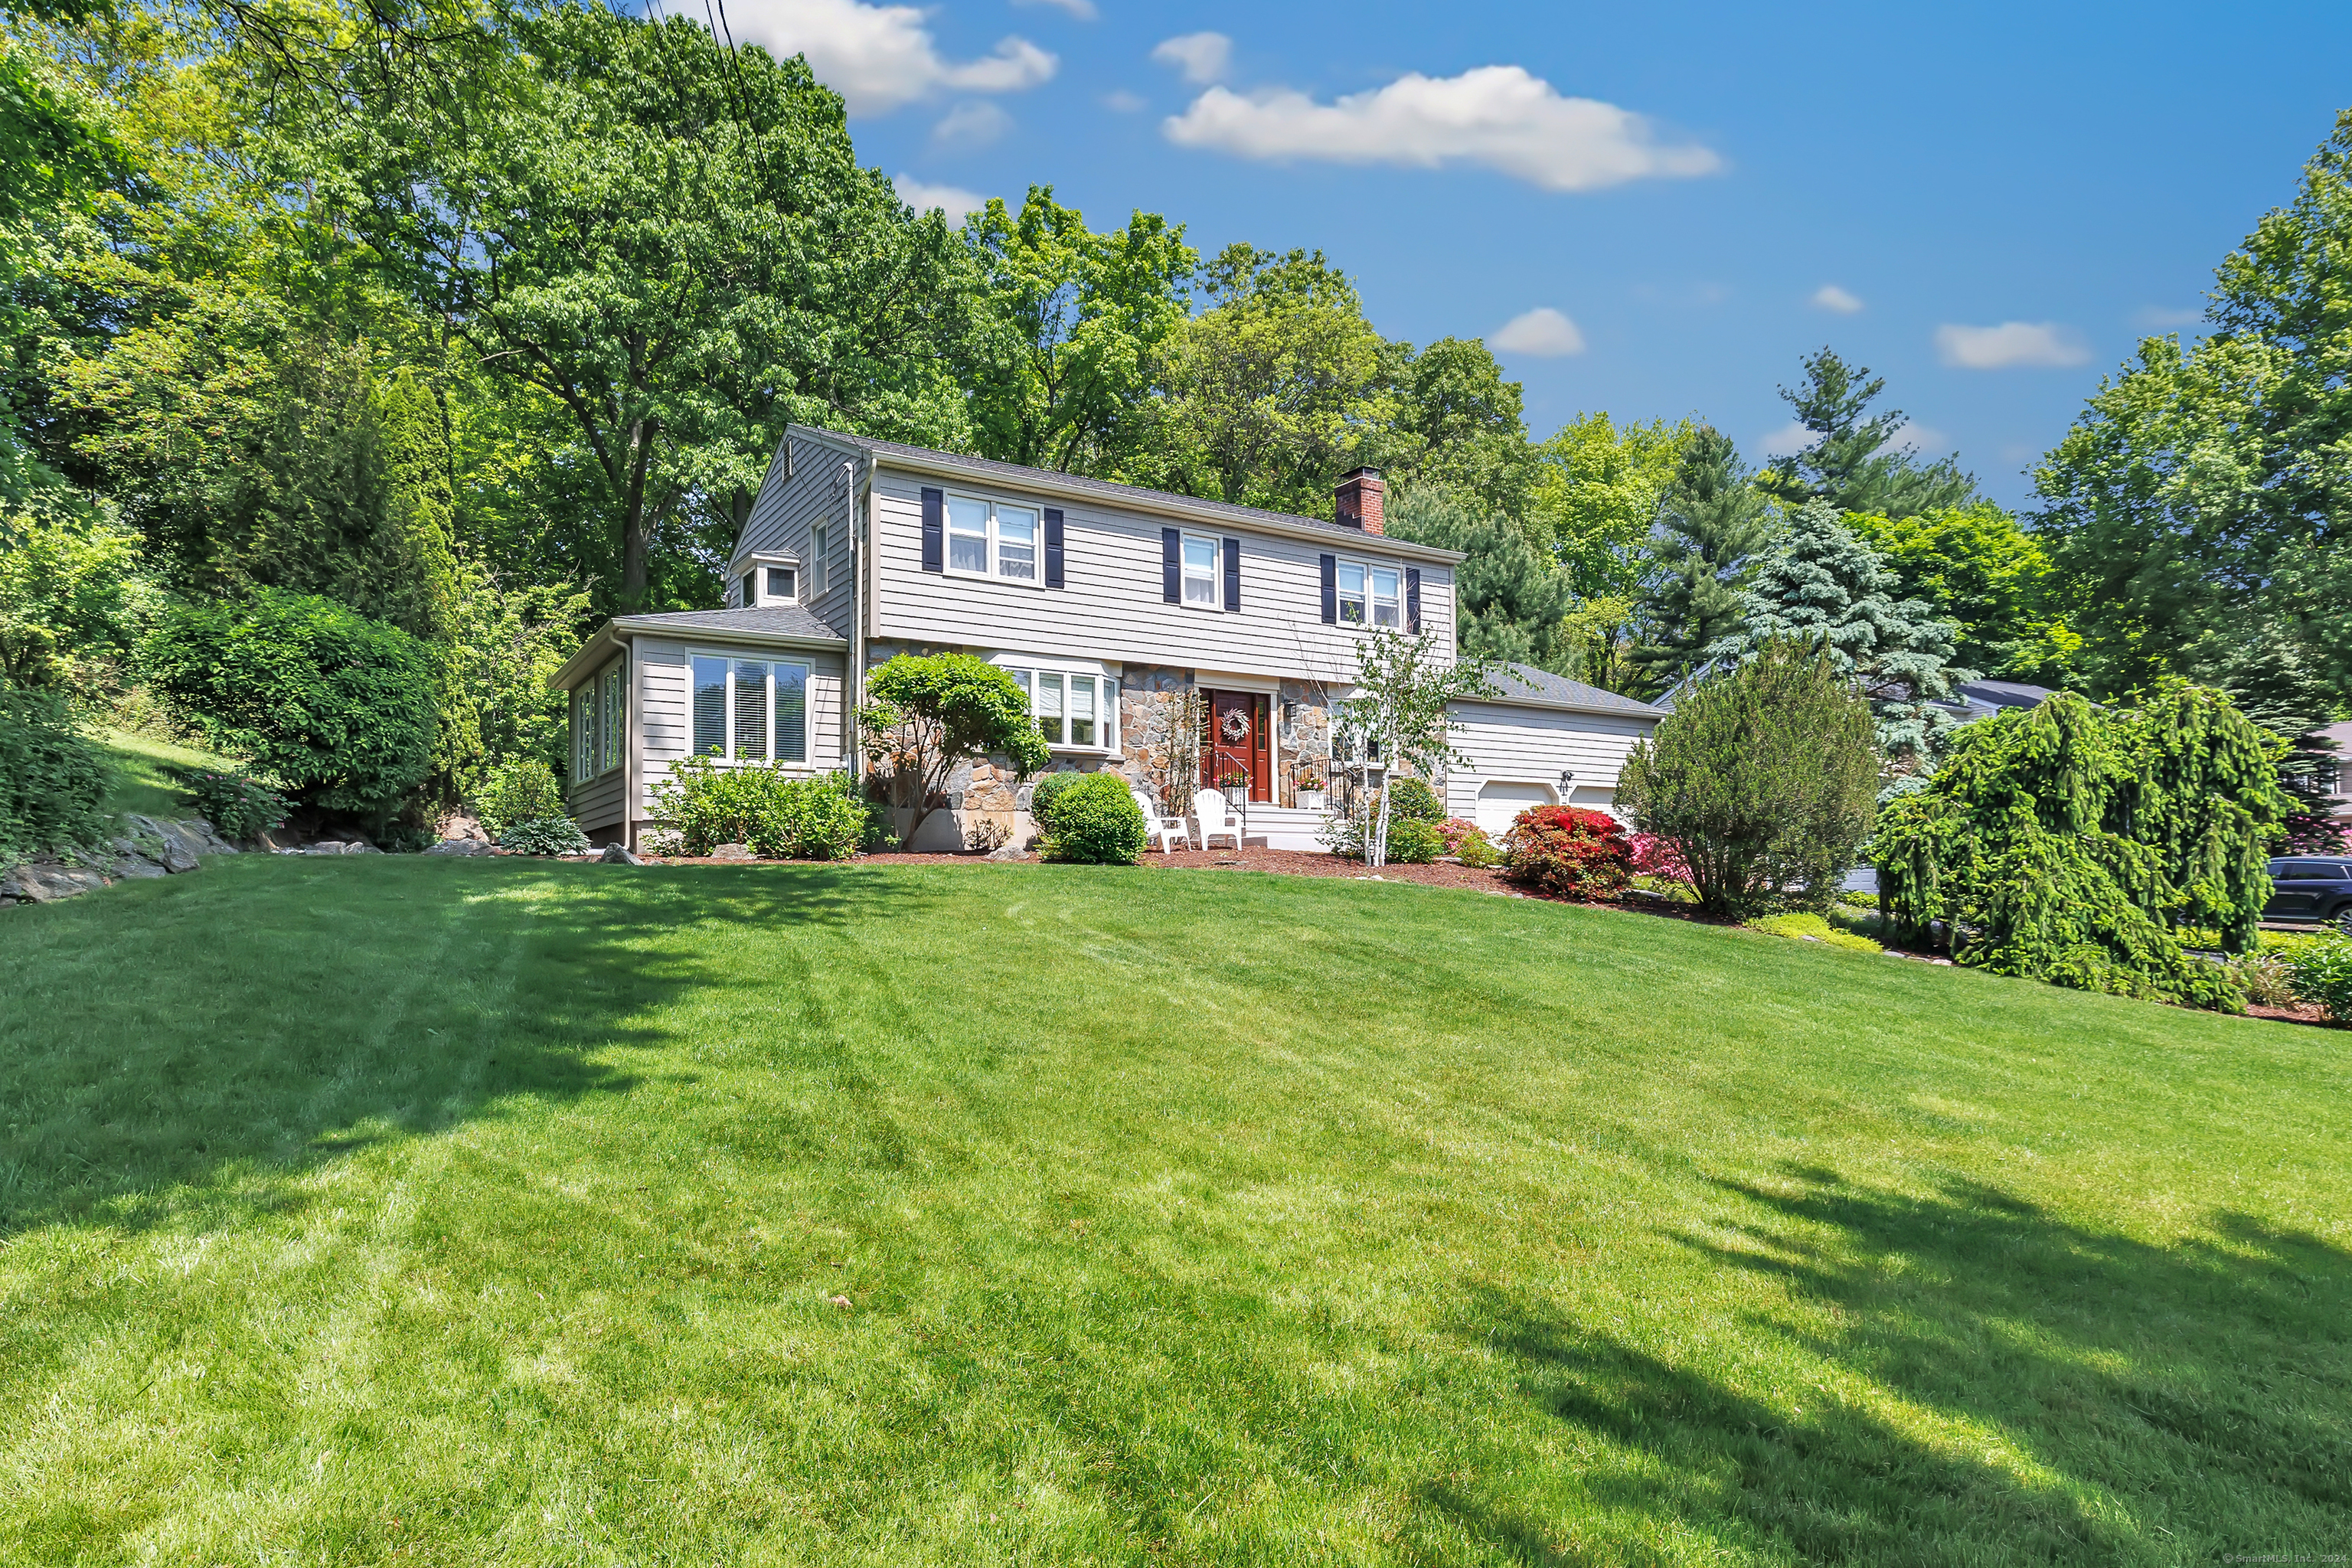 Located on a sought-after tree-lined street in Fairfield's Lake Mohegan neighborhood, this classic Colonial exudes warmth and charm both inside and out. The professionally landscaped yard & charming facade gives this home tons of curb appeal. Through the front door, you are greeted by a sun-filled living room that opens right into the gourmet EIK. This chef's dream has plenty of storage, SS appliances, shaker-style cabinets, quartz countertops, & an oversized island. The open concept living creates the perfect place to entertain. Just off the living room is a bonus space that can be used as a formal dining room or office. The front-to-back family room has a stone fireplace, crown molding, built-ins, and sliders to the screened-in porch. The screened-in porch will easily become your favorite room in the house! The tranquility & beautiful views make it the perfect place to unwind at the end of the day. The 2nd floor is home to the primary suite that is full of natural light, has a walk-in closet & updated full bathroom. 3 addt'l bedrooms & a chic hallway bathroom finish the 2nd floor. Step outside to your backyard oasis, complete w/a two-tiered deck leading you to the lush backyard w/mature trees & greenery. This picture-perfect neighborhood with annual block parties is close to Lake Mohegan where you can enjoy swimming, the splash pad & hiking trails. Minutes to schools, amazing restaurants, parks, beaches, golf courses, & more. Enjoy lake life year-round at 316 Canterbury La